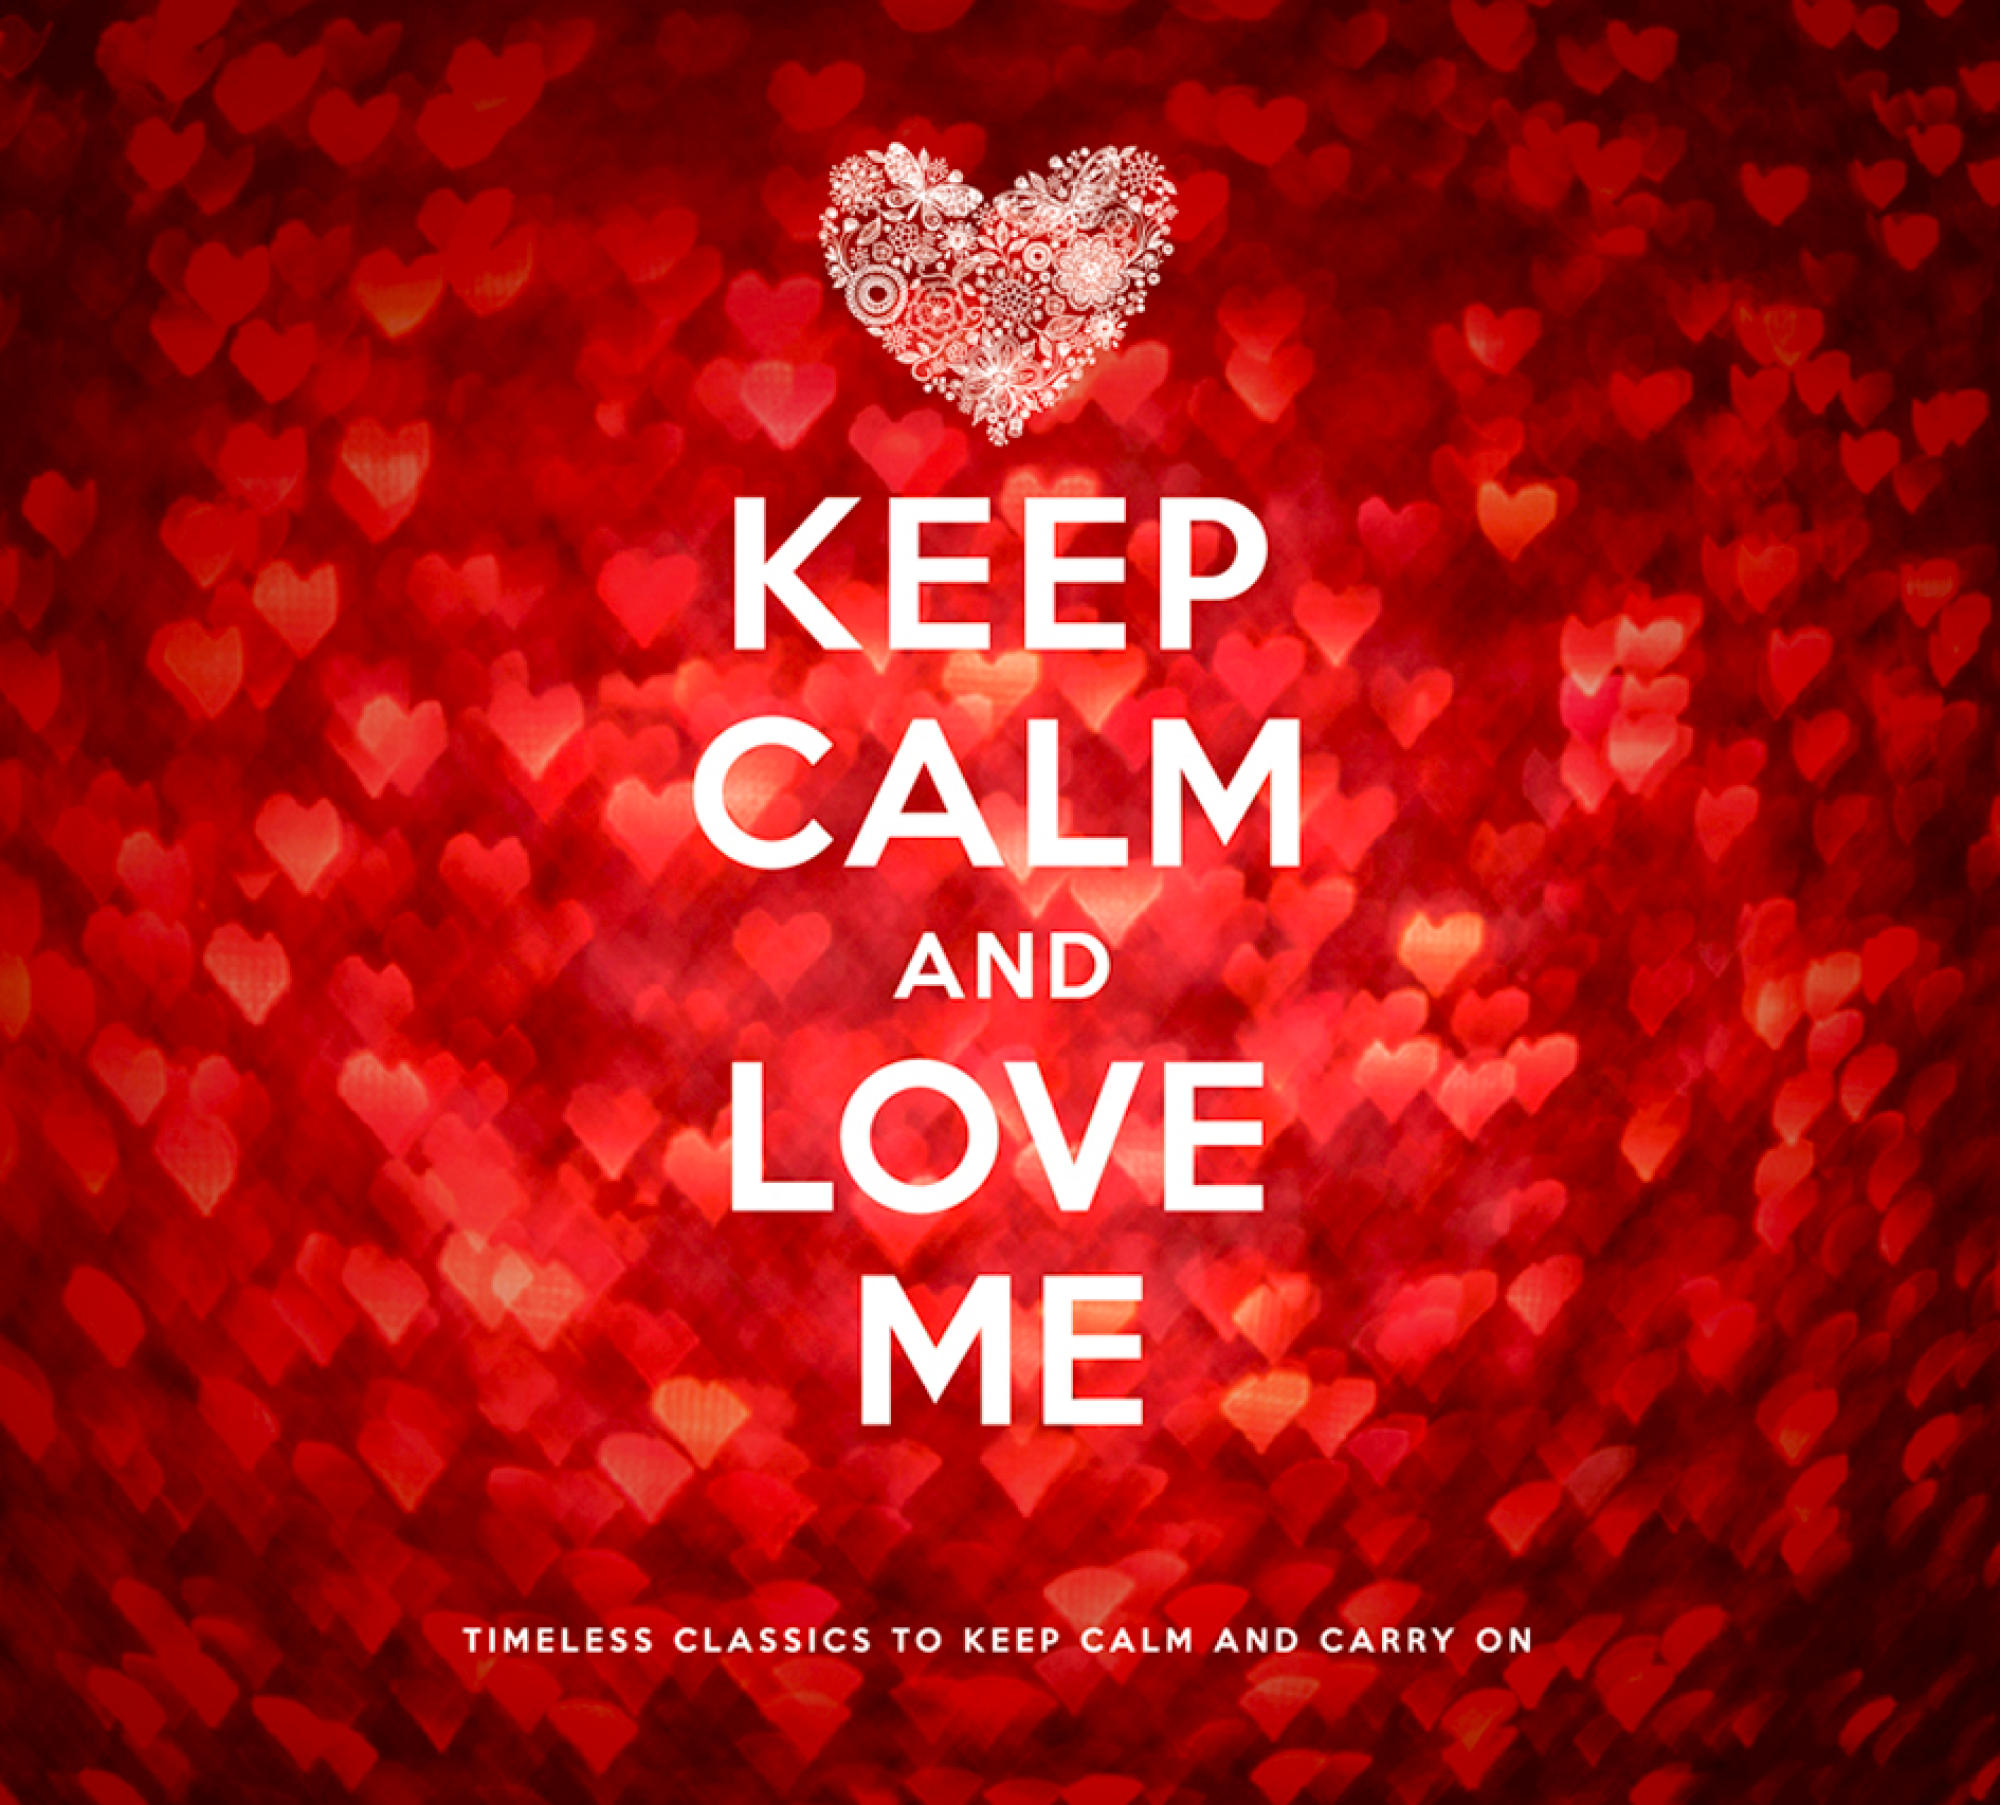 VARIOUS - Keep Love And Me - (CD) Calm